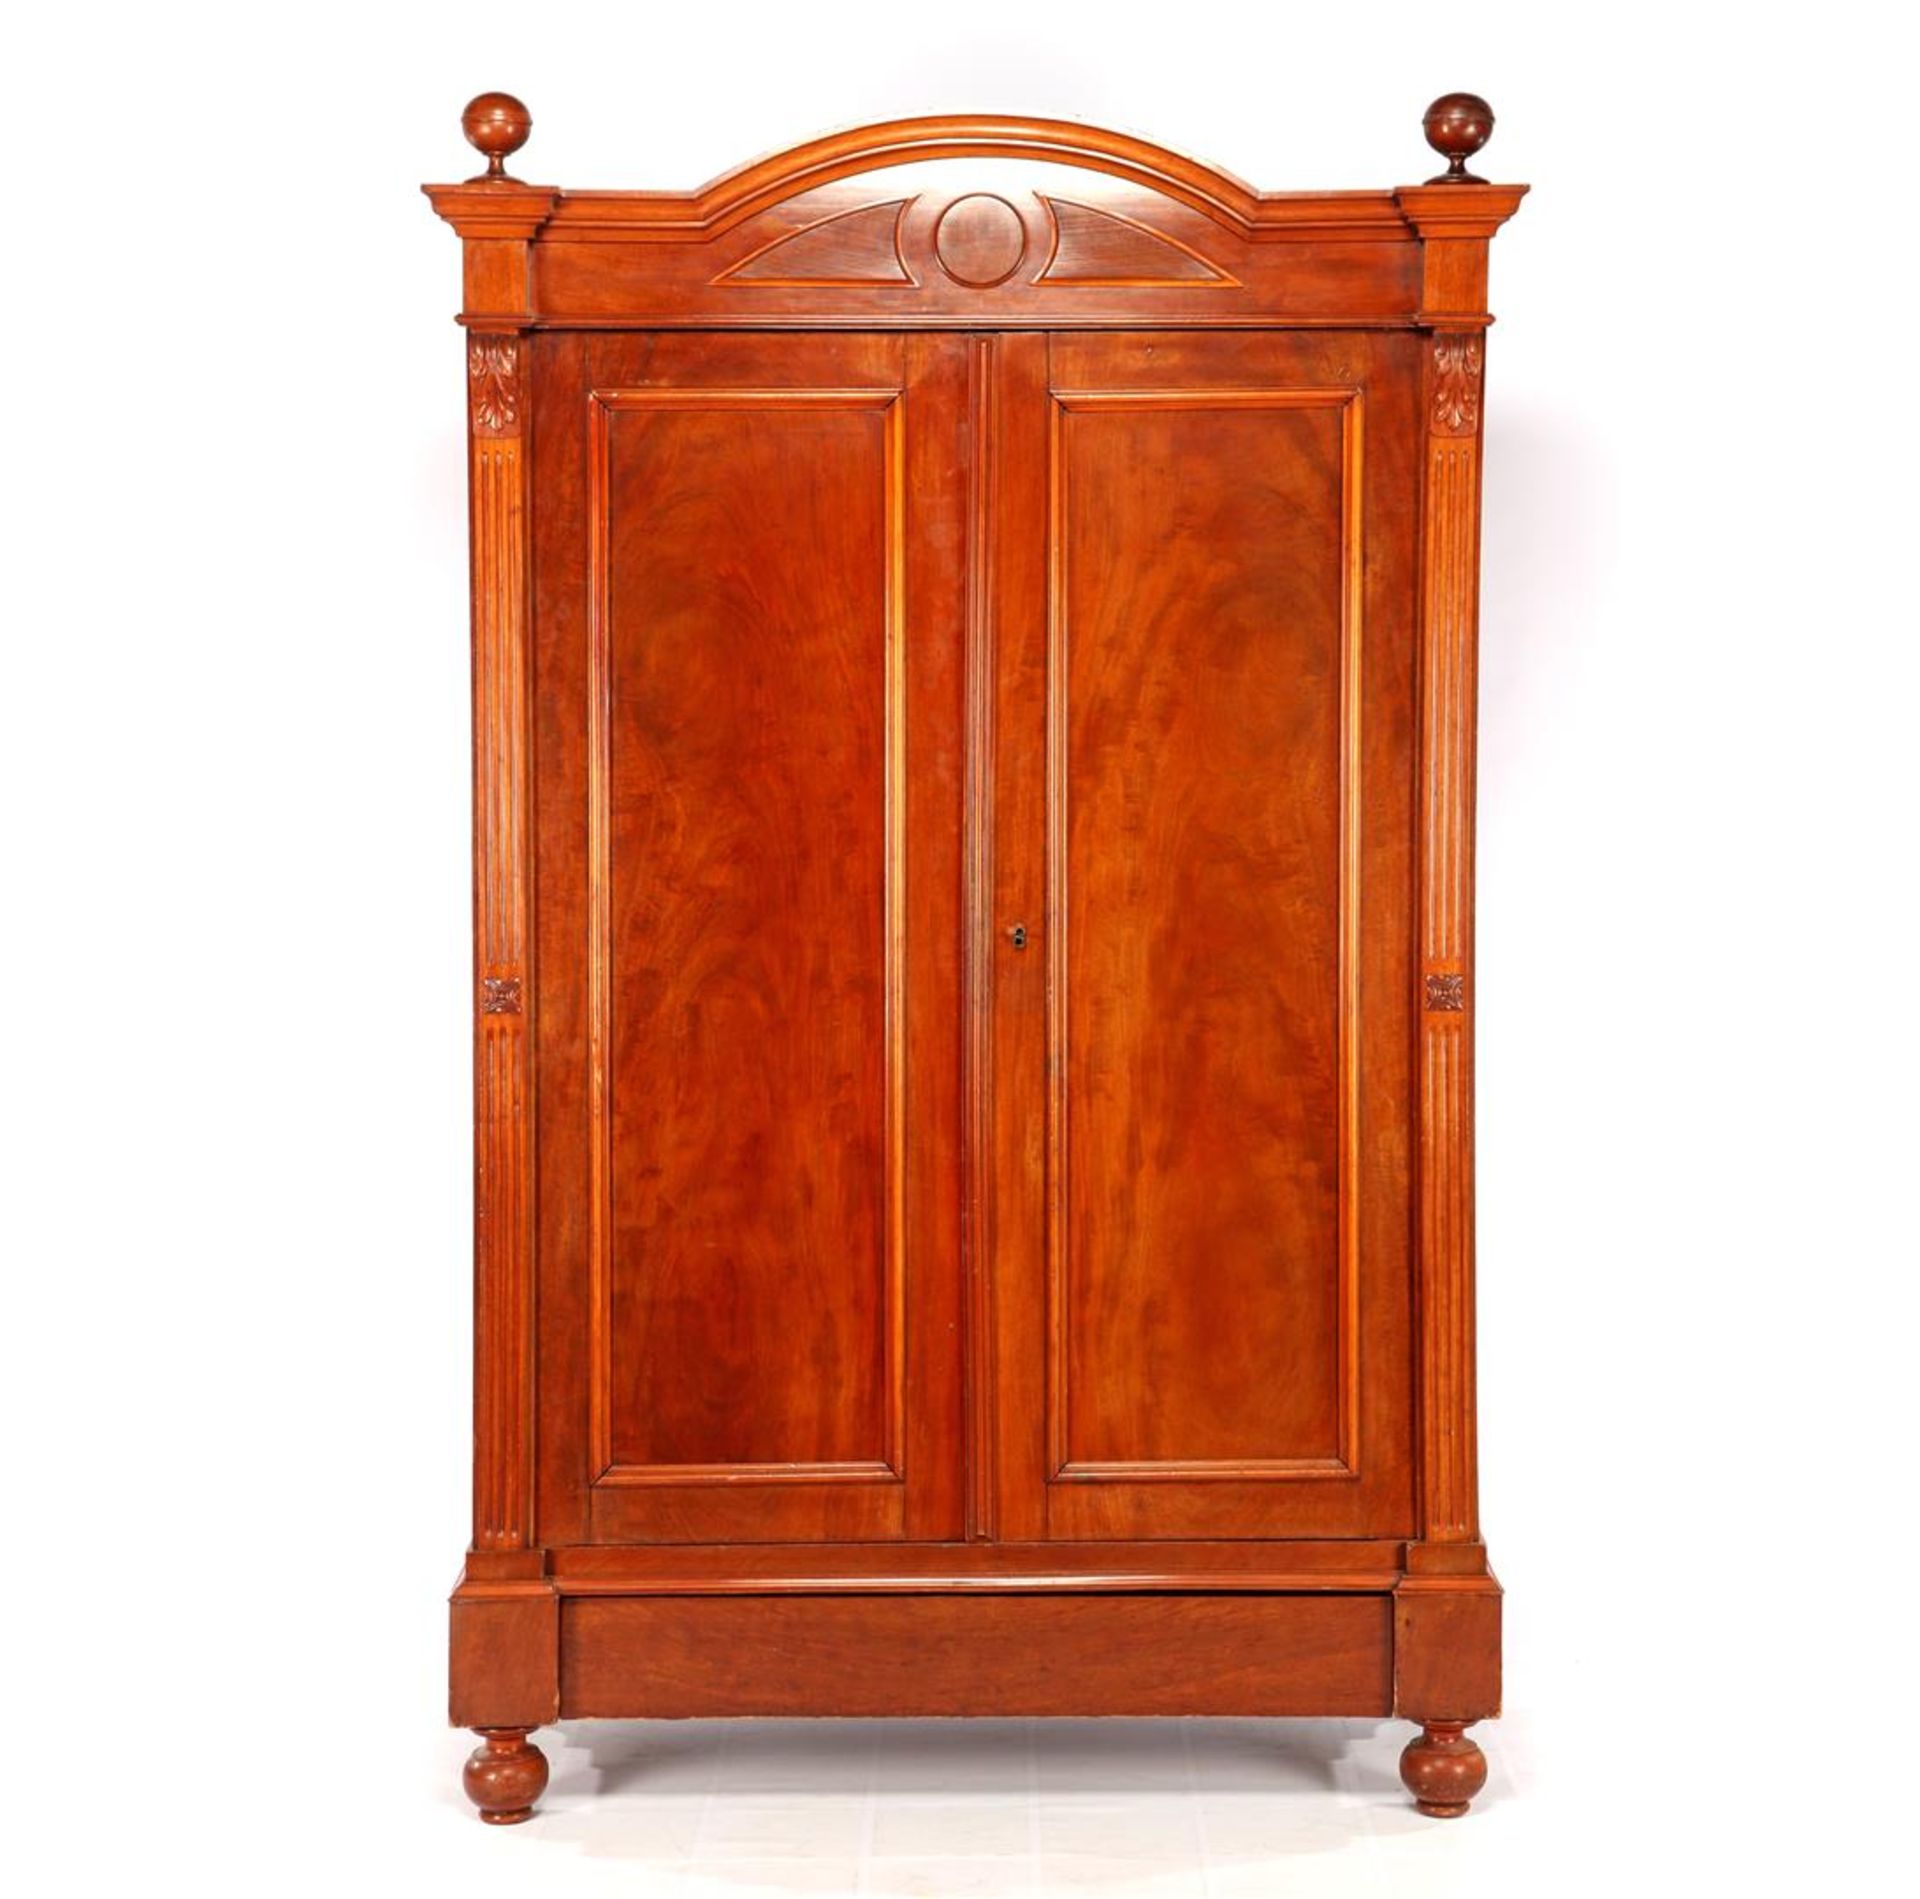 Mahogany 19th century 2-door cabinet with drawer, flutes, stitching acanthus leaves & ornaments